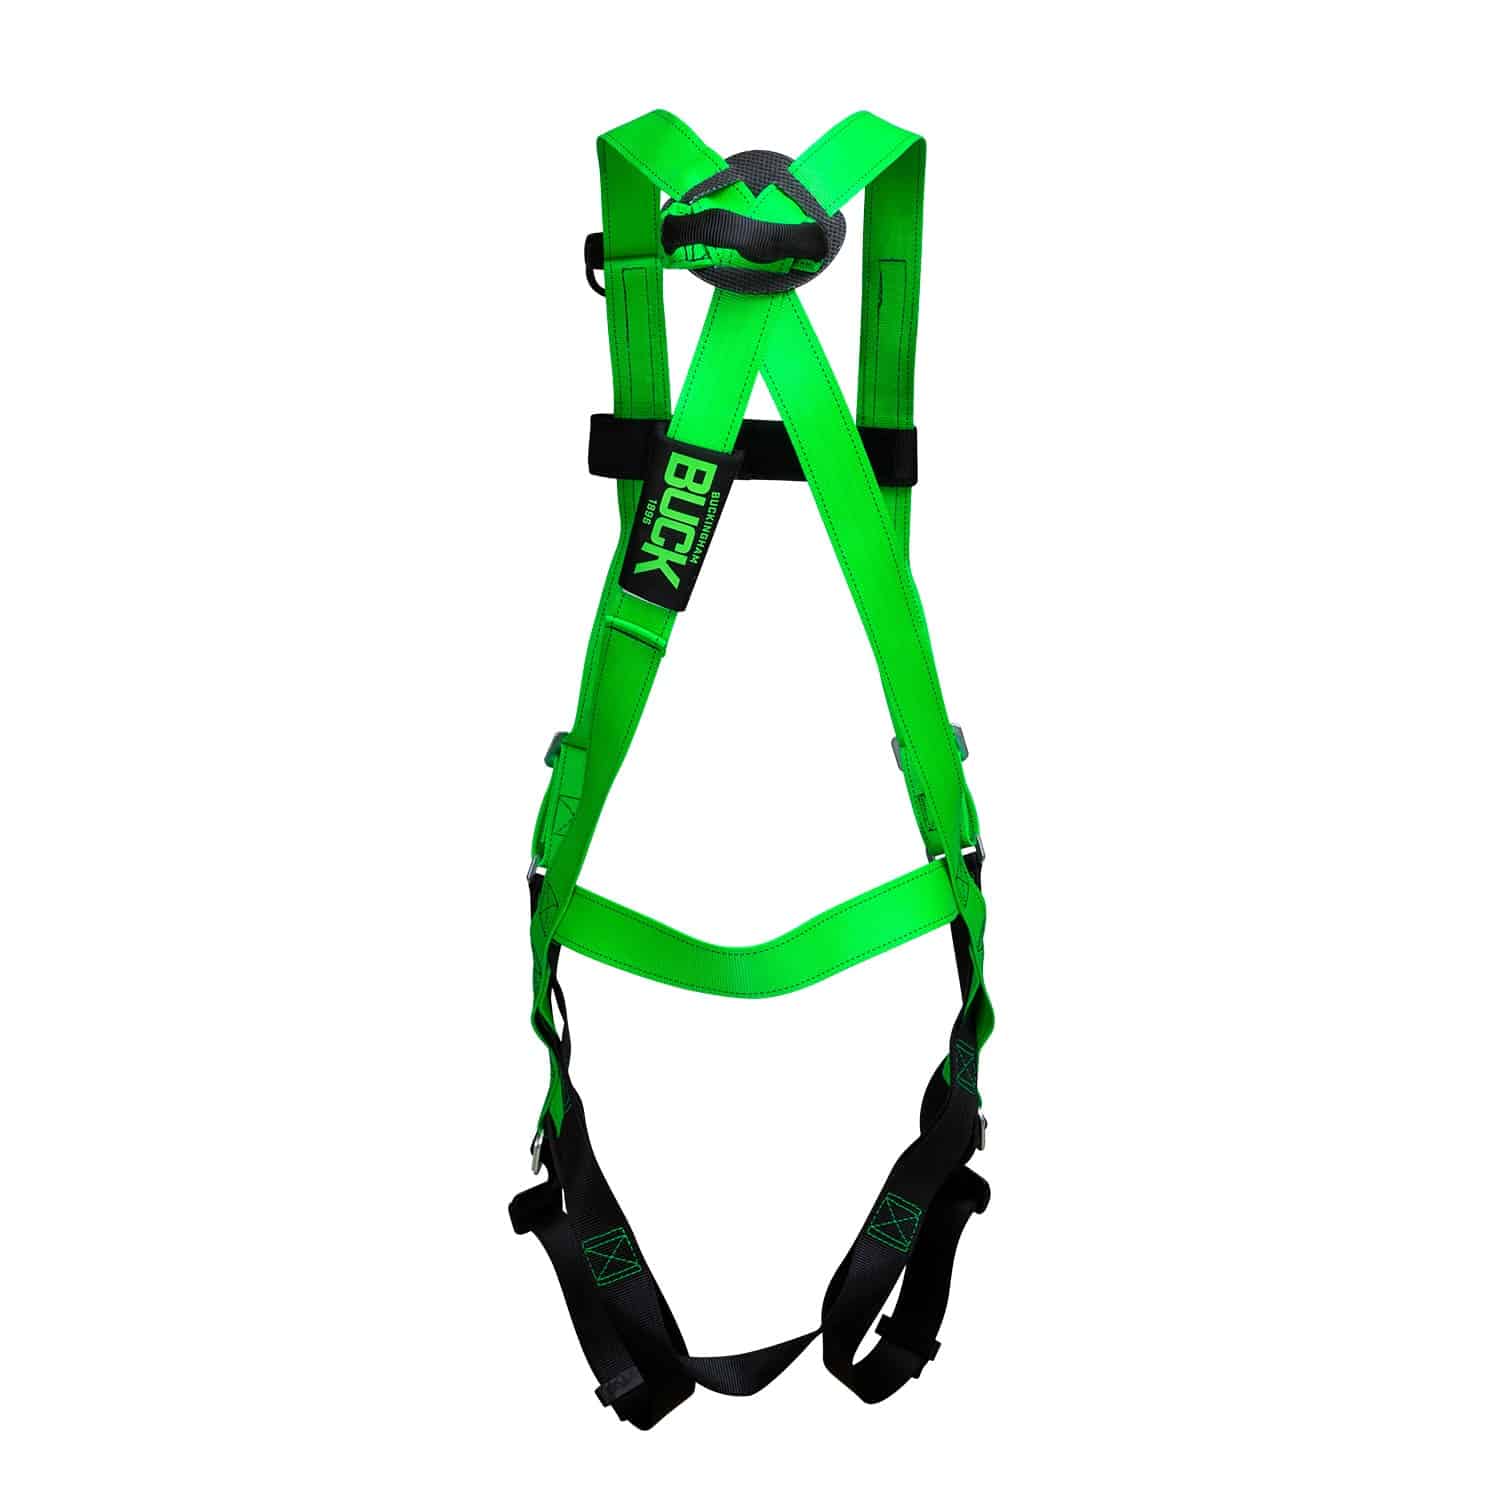 Buckingham H Style Full Body Harness from GME Supply